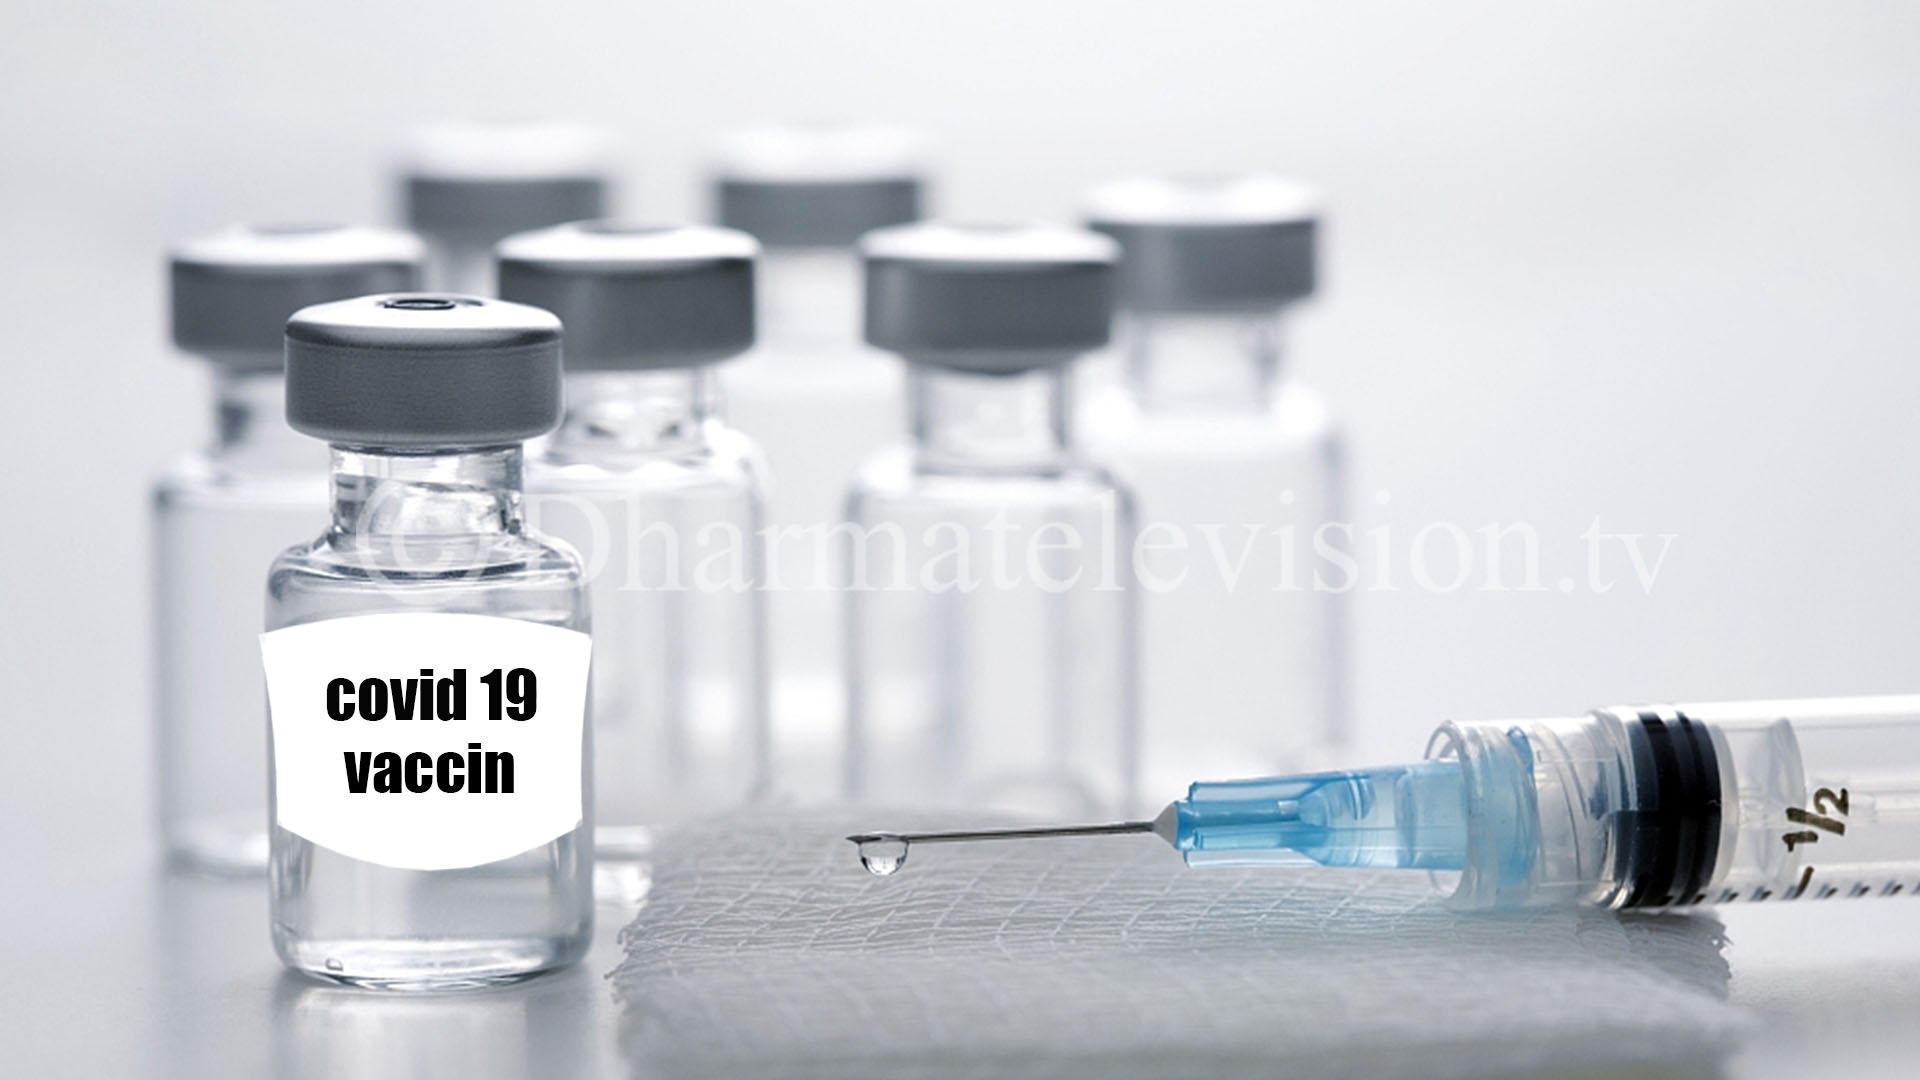 More than 100,000 people vaccinated against Covid 19 in Russia